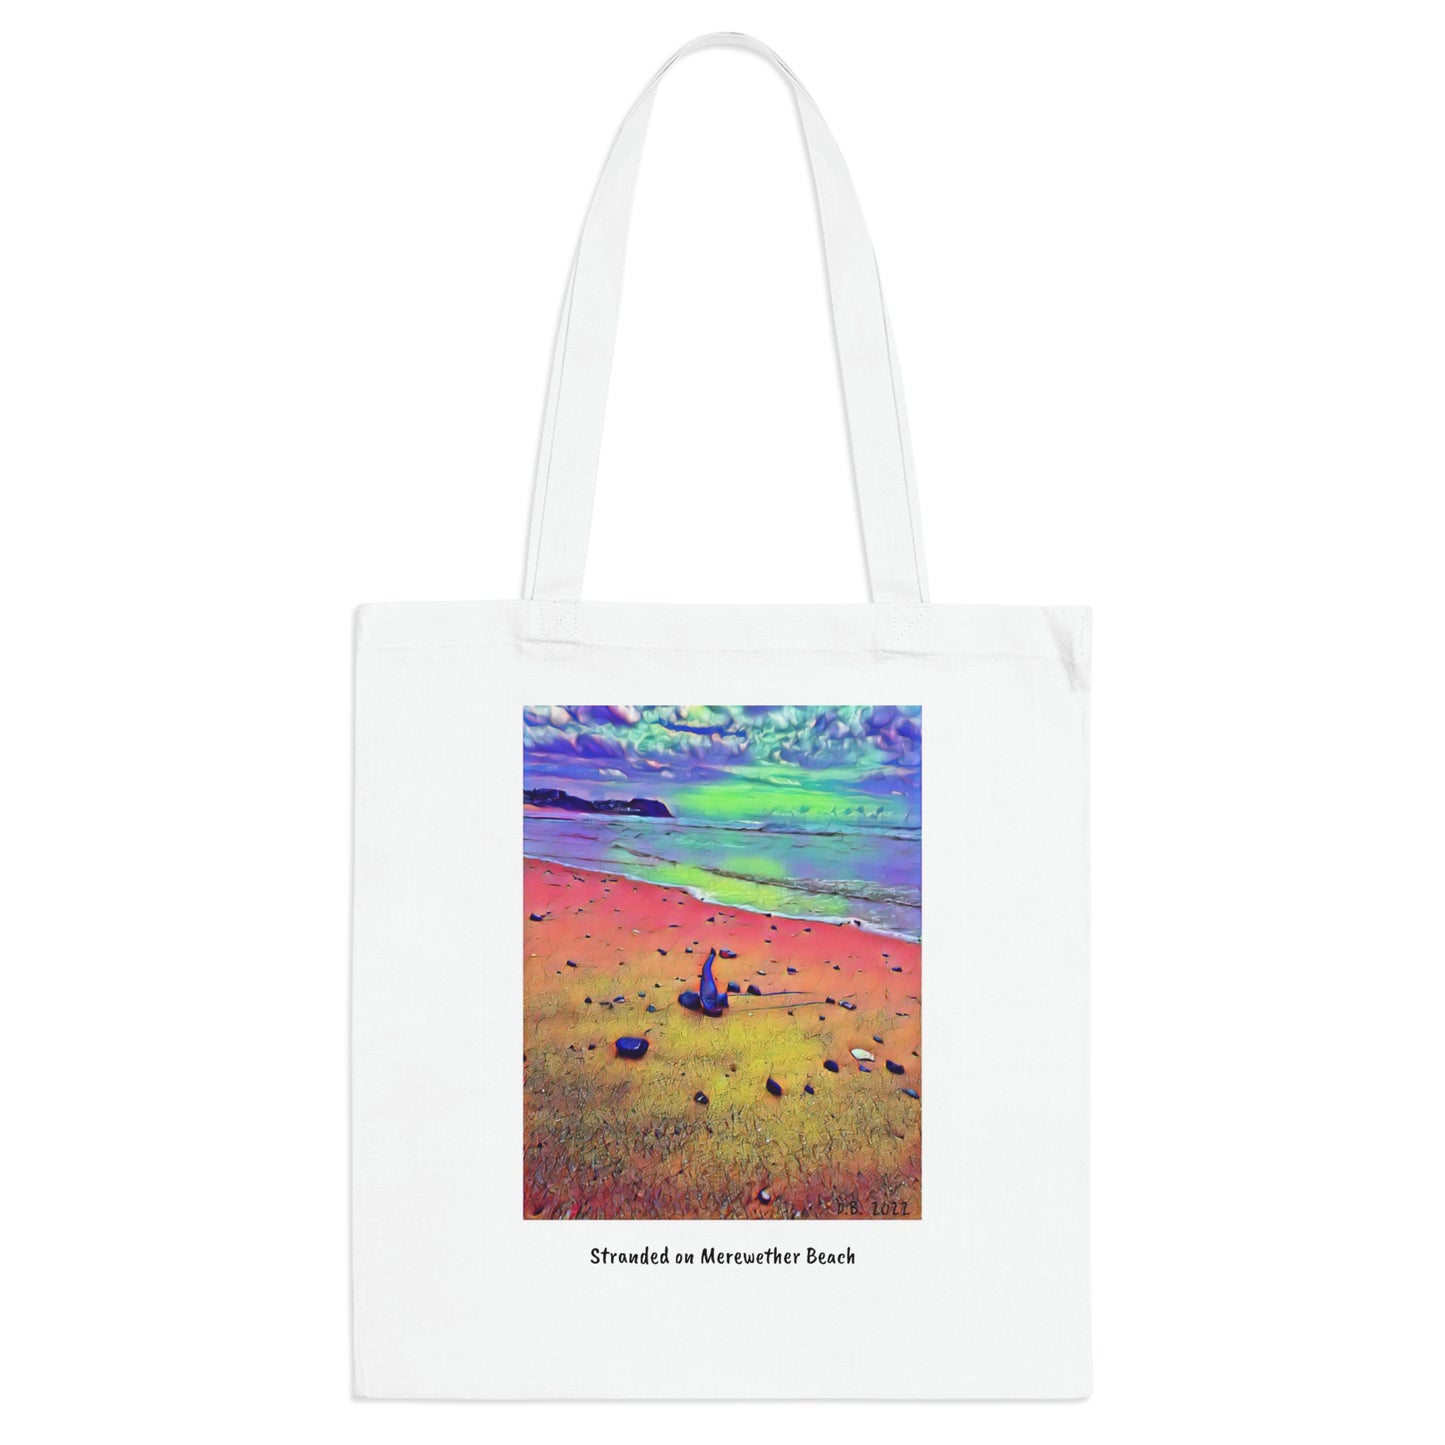 Stranded on Merewether Beach by D.B. Tote Bag